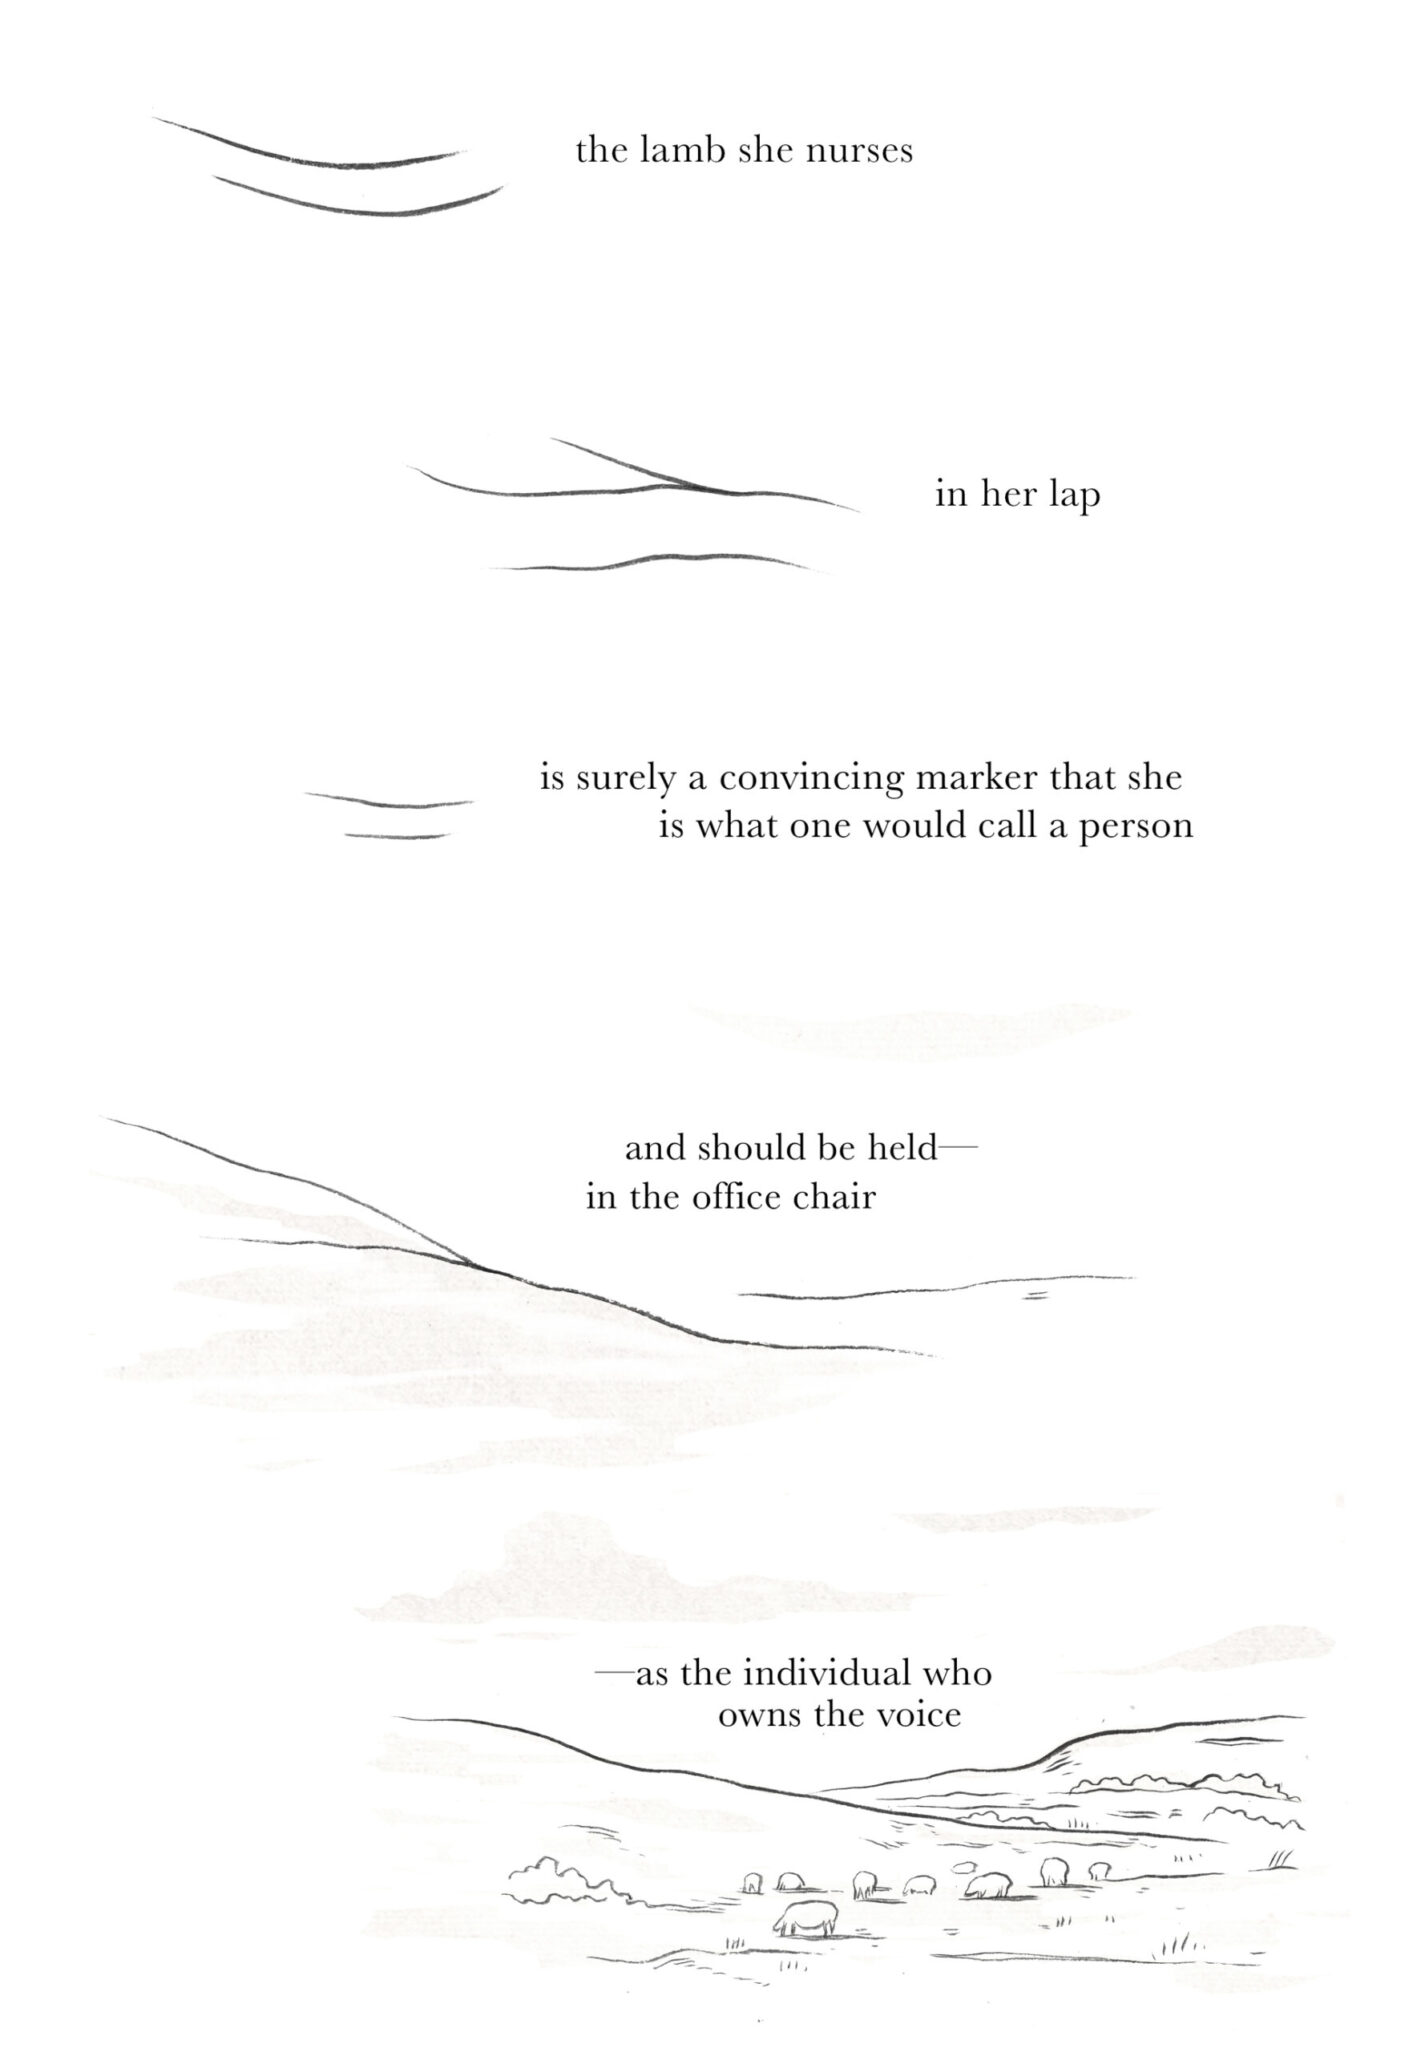 Two lines curve in parallel. The same lines appear to crack. From the lines, mountains emerge, then a field of sheep graze by the bottom of the page. Text reads: the lamb she nurses / in her lap / is surely a convincing marker that she / is what one would call a person / and should be held— / in the office chair / —as the individual who / owns the voice